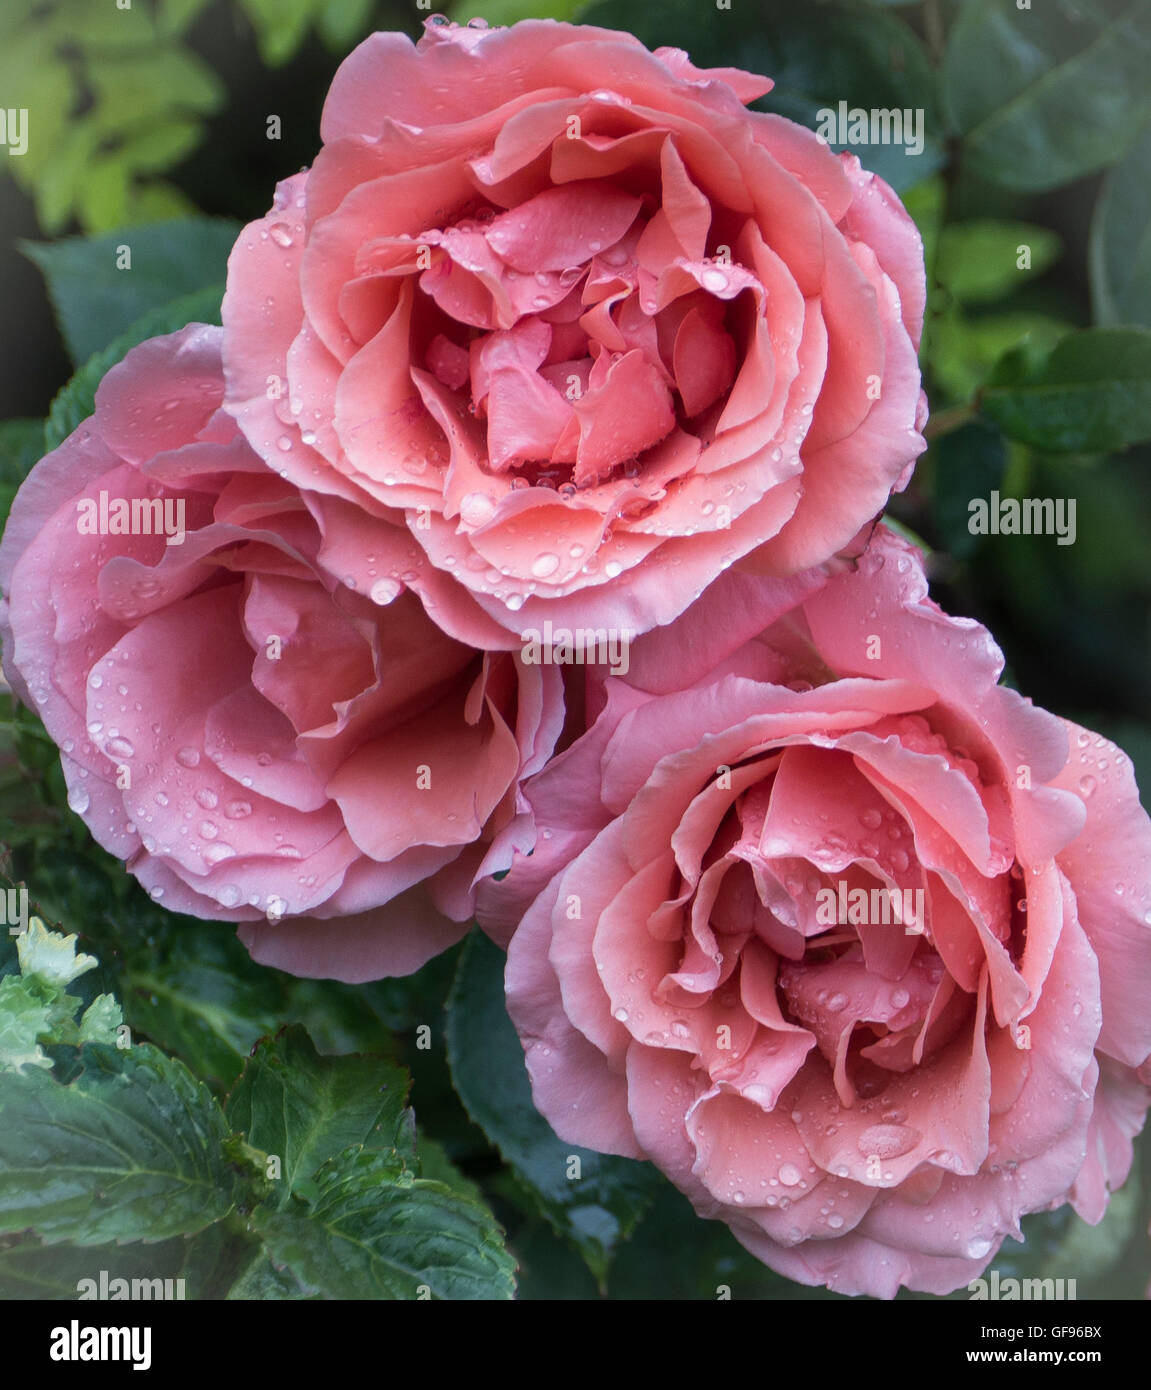 Rose 'Blessings' A Hybrid Tea Rose,in full bloom with droplets of rain on petals Stock Photo